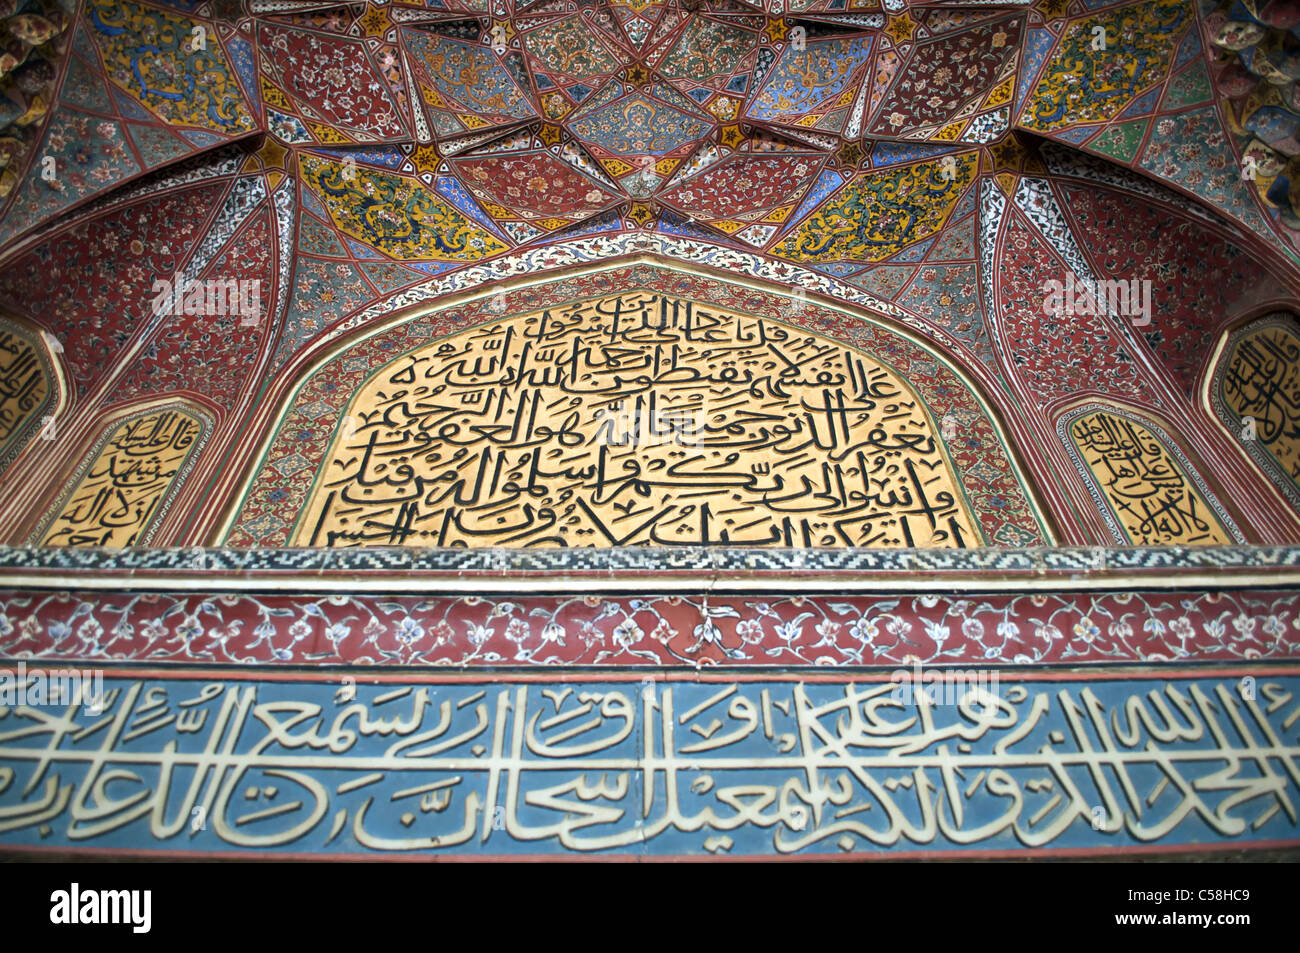 Interior of Wazir Khan Mosque of Lahore depicting hand painted floral designs and Arabic calligraphy. Stock Photo